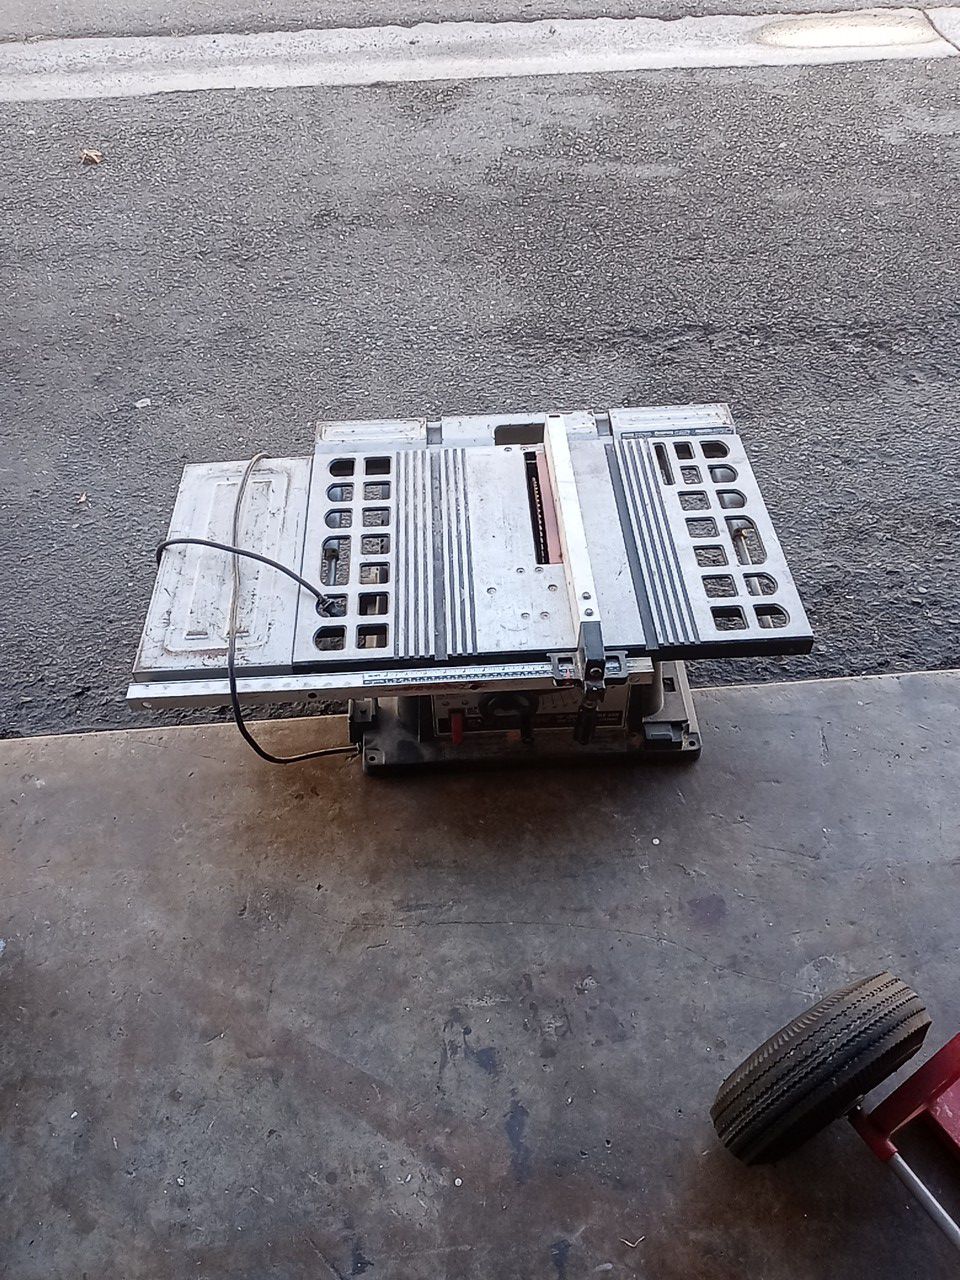 Table saw for sale